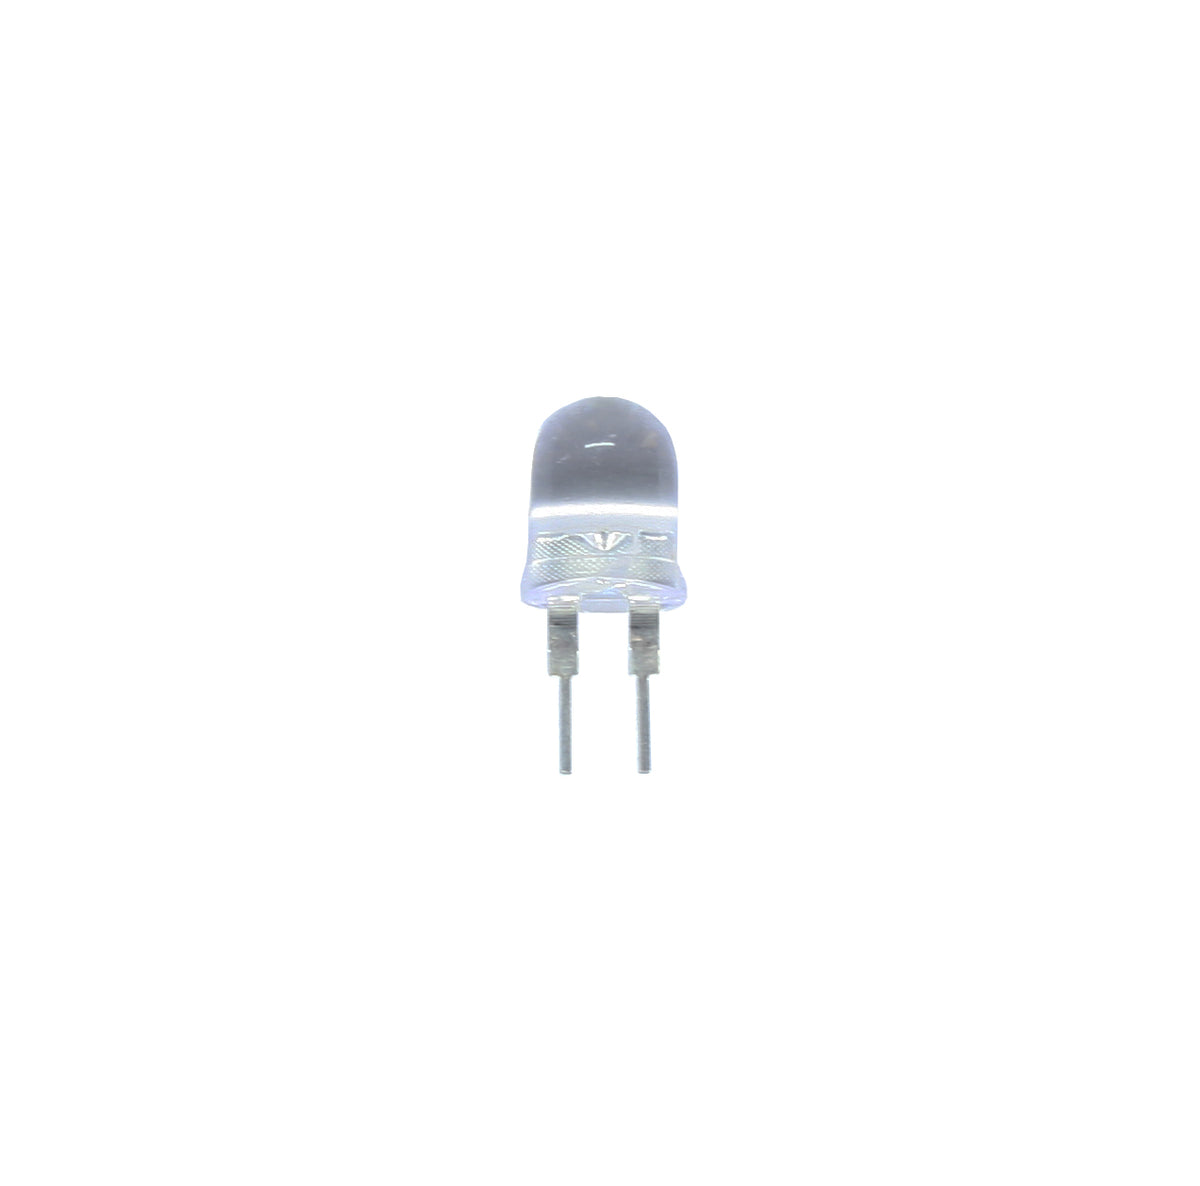 Replacement LED Bulb - 800-453